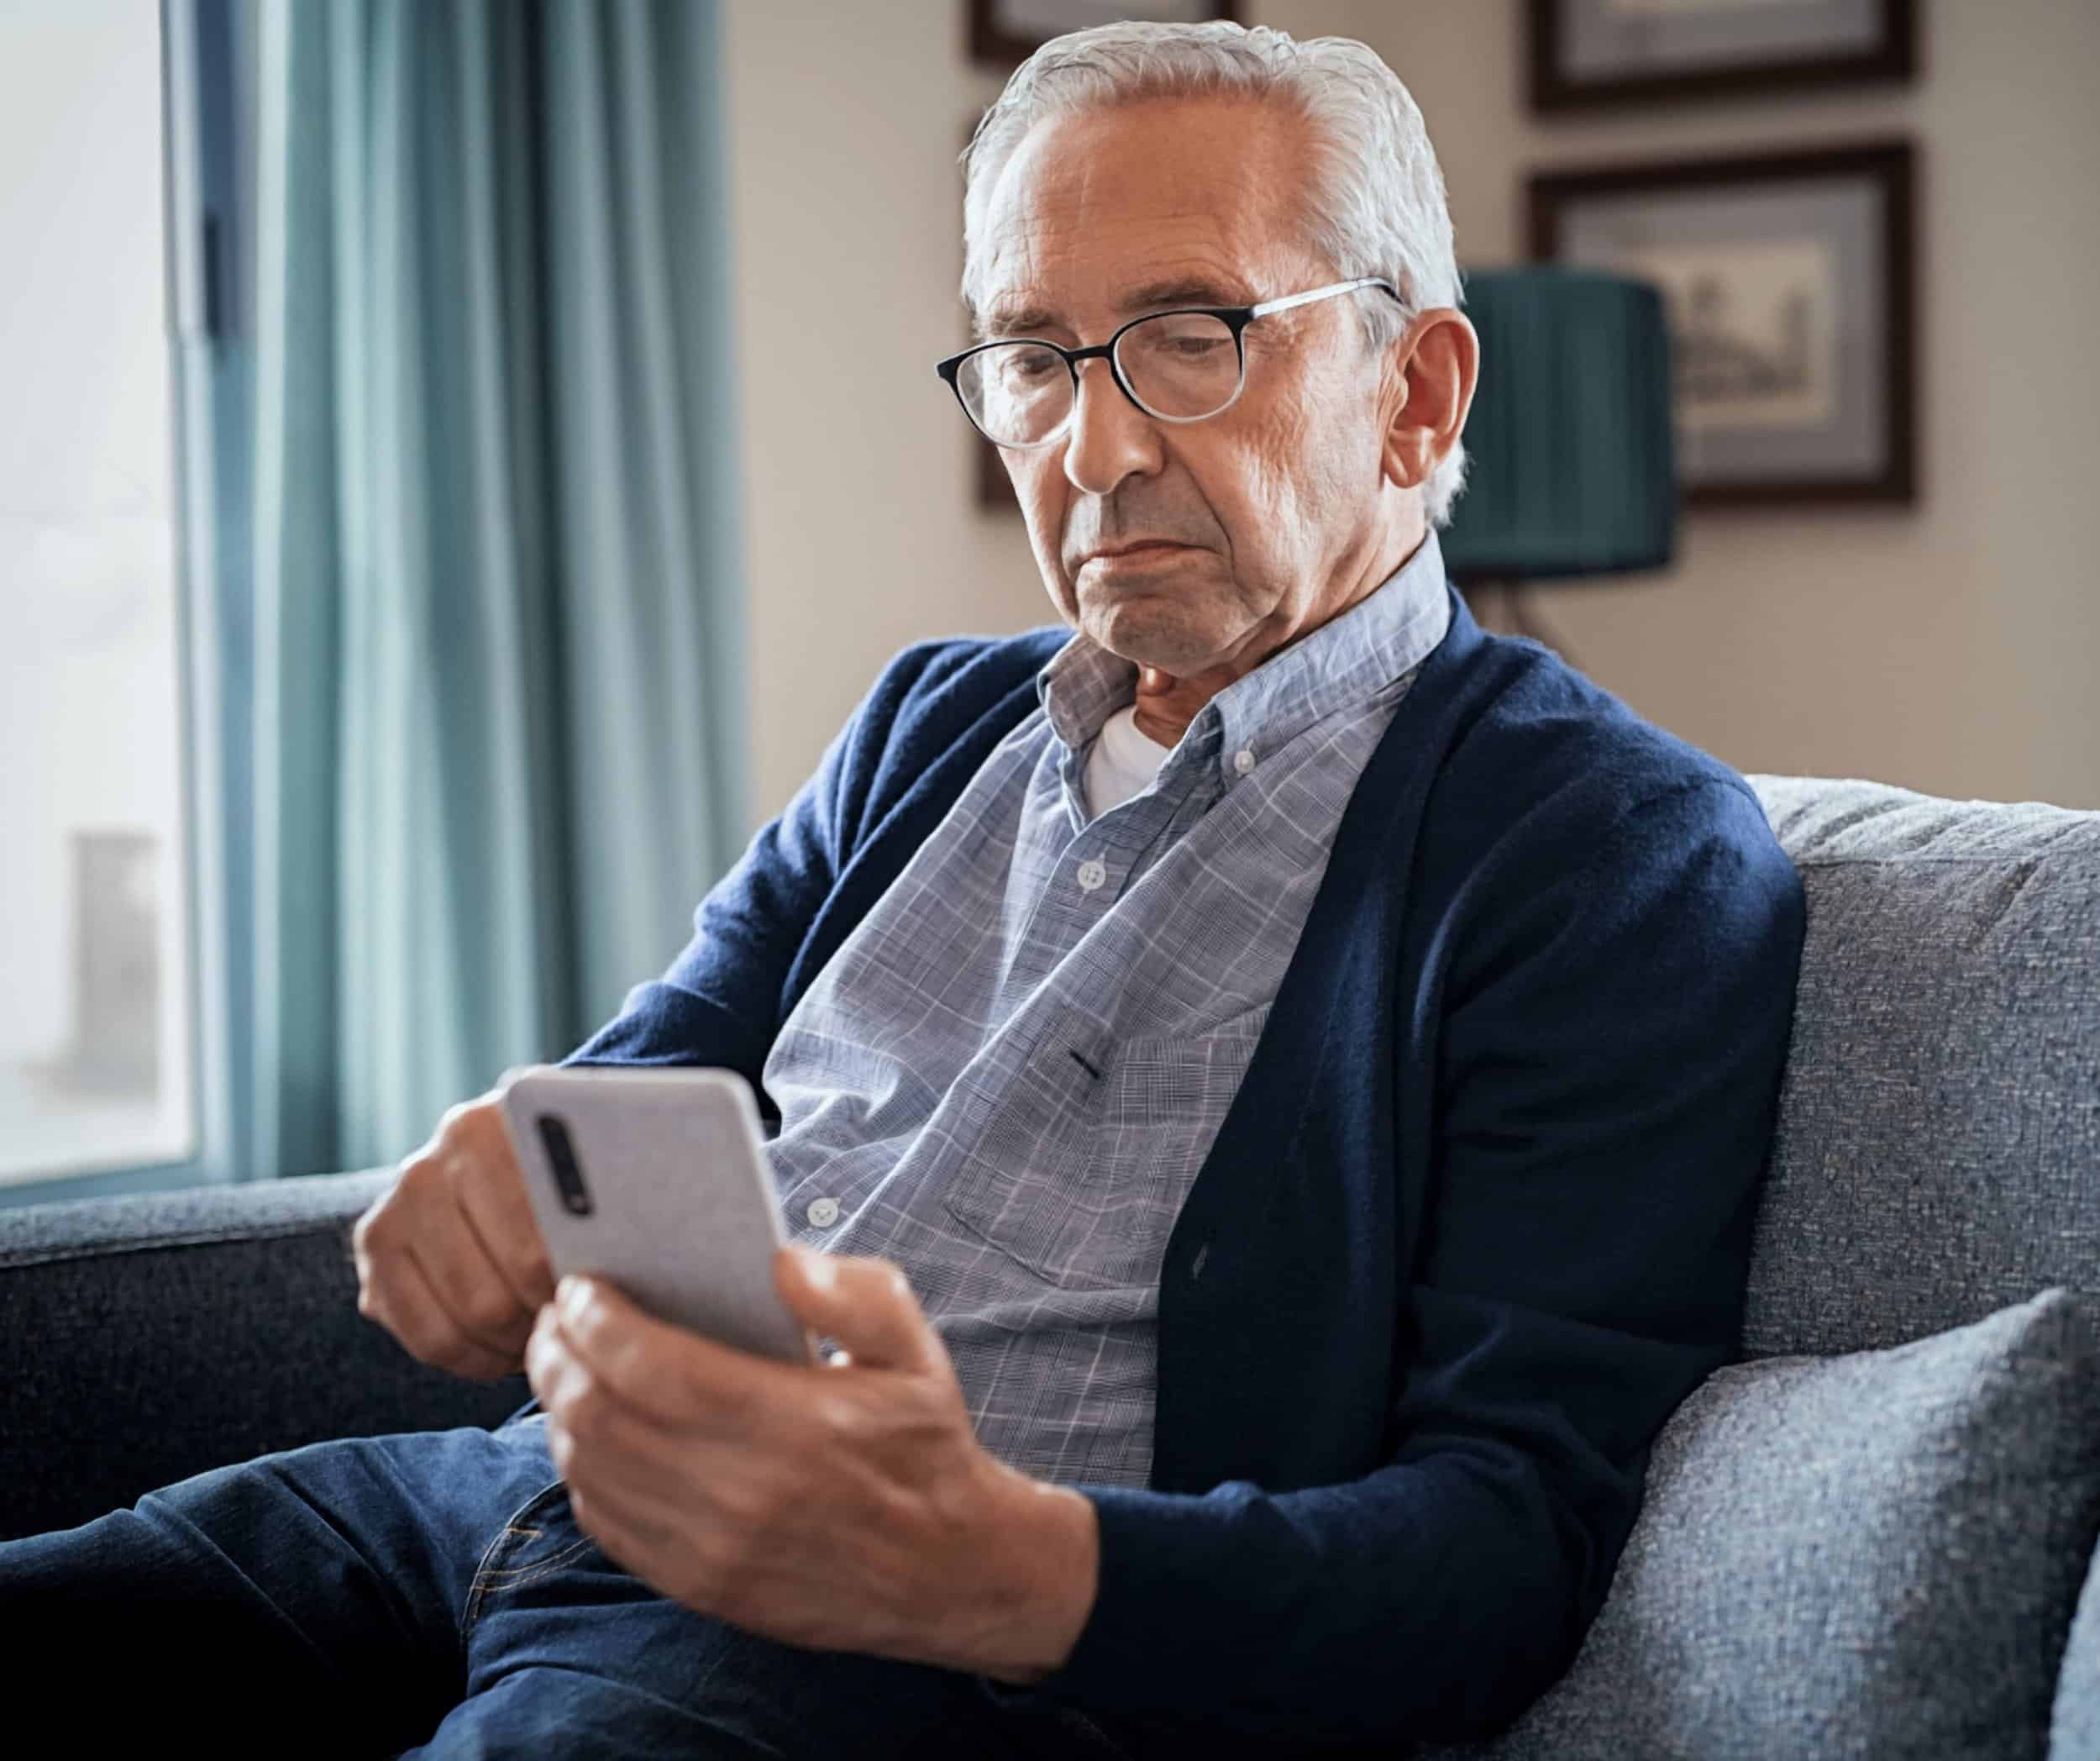 Older Adult holding a smartphone in hand